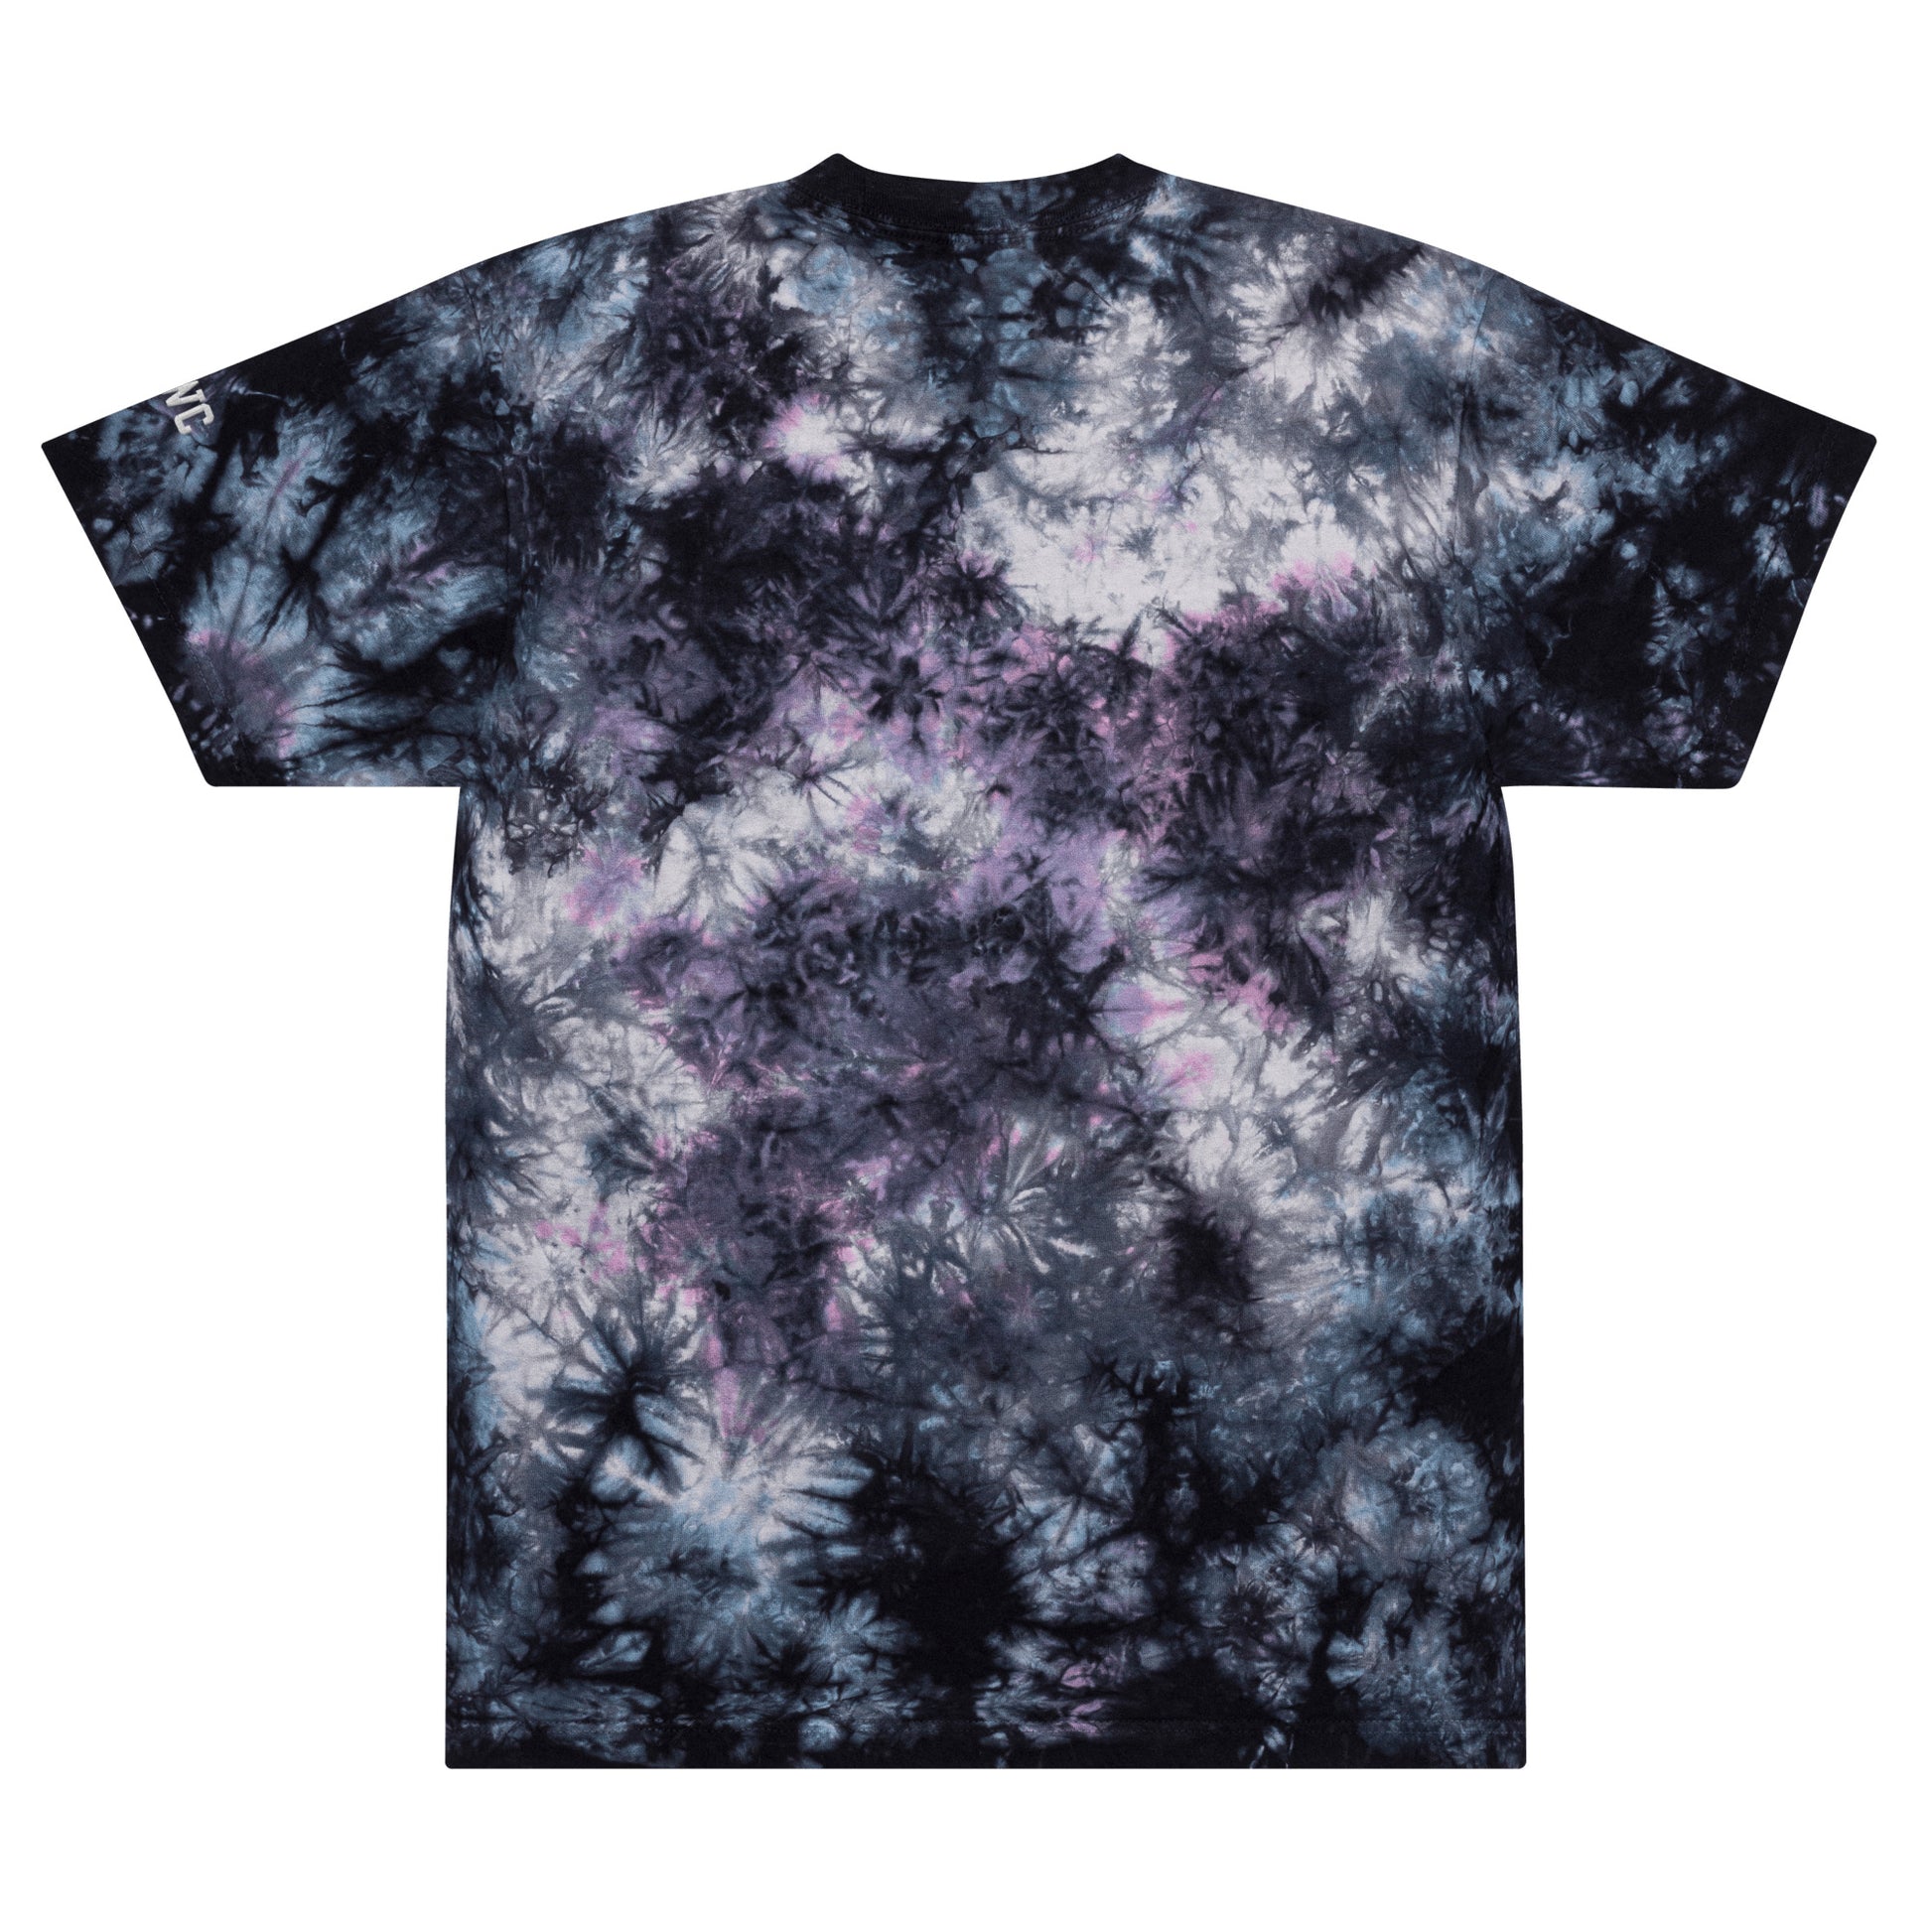 Basgiath War College Licensed Embroidered Oversized tie-dye t-shirt - Quill & Cauldron